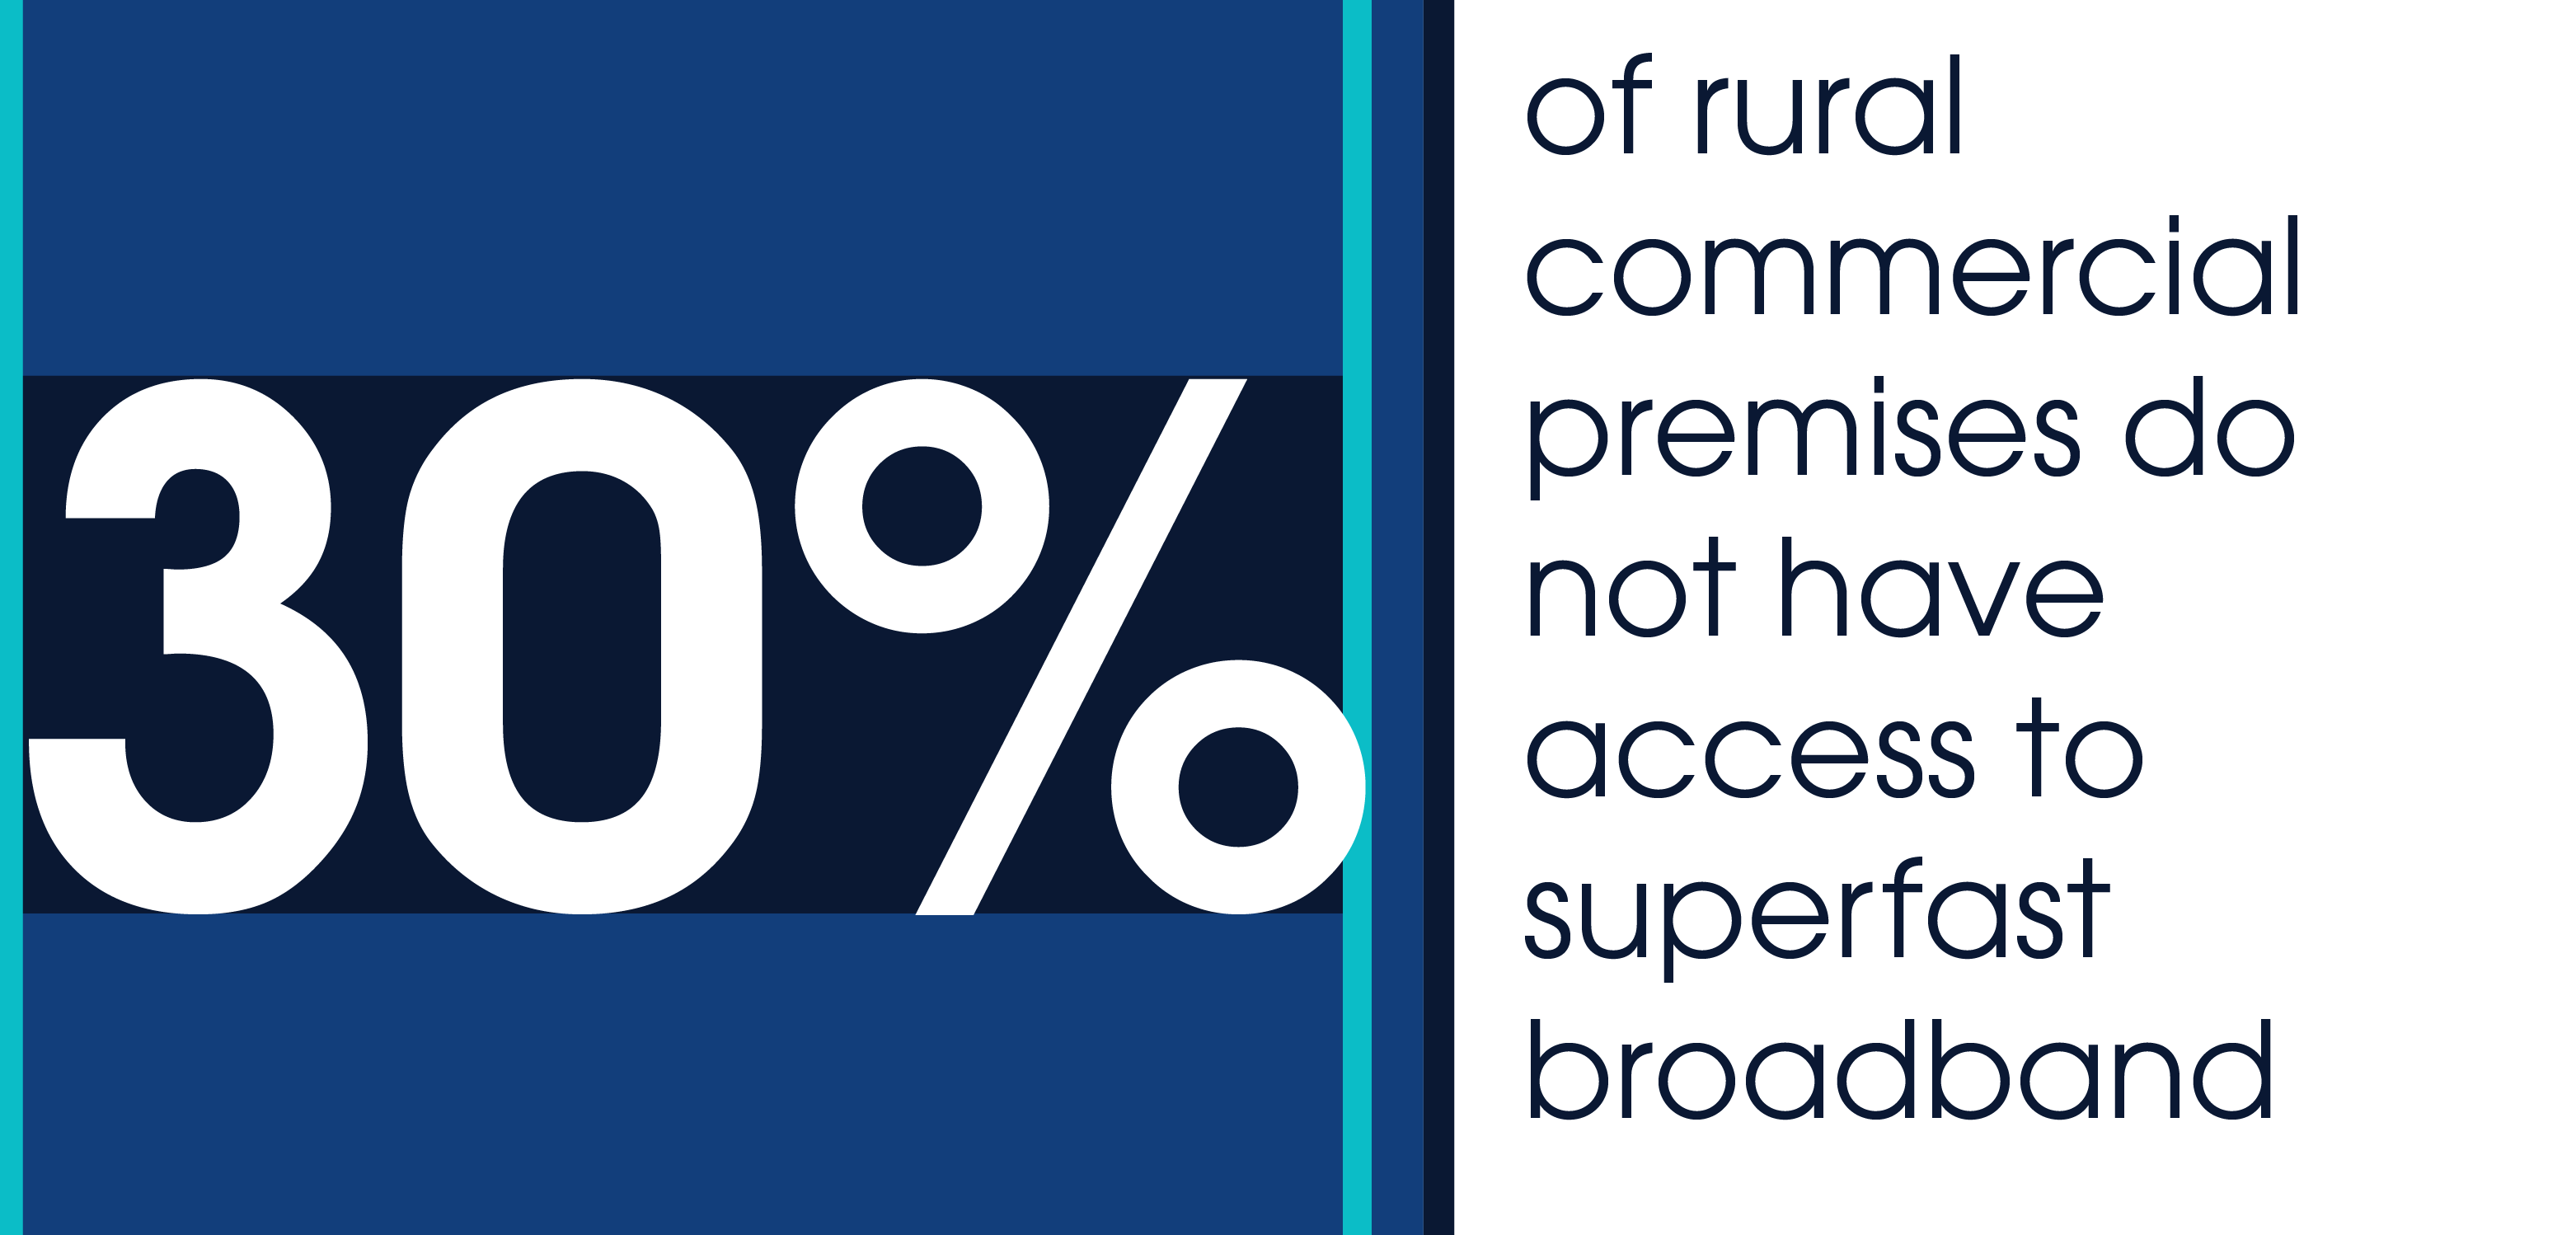 30% of rural commercial premises do not have access to superfast broadband.